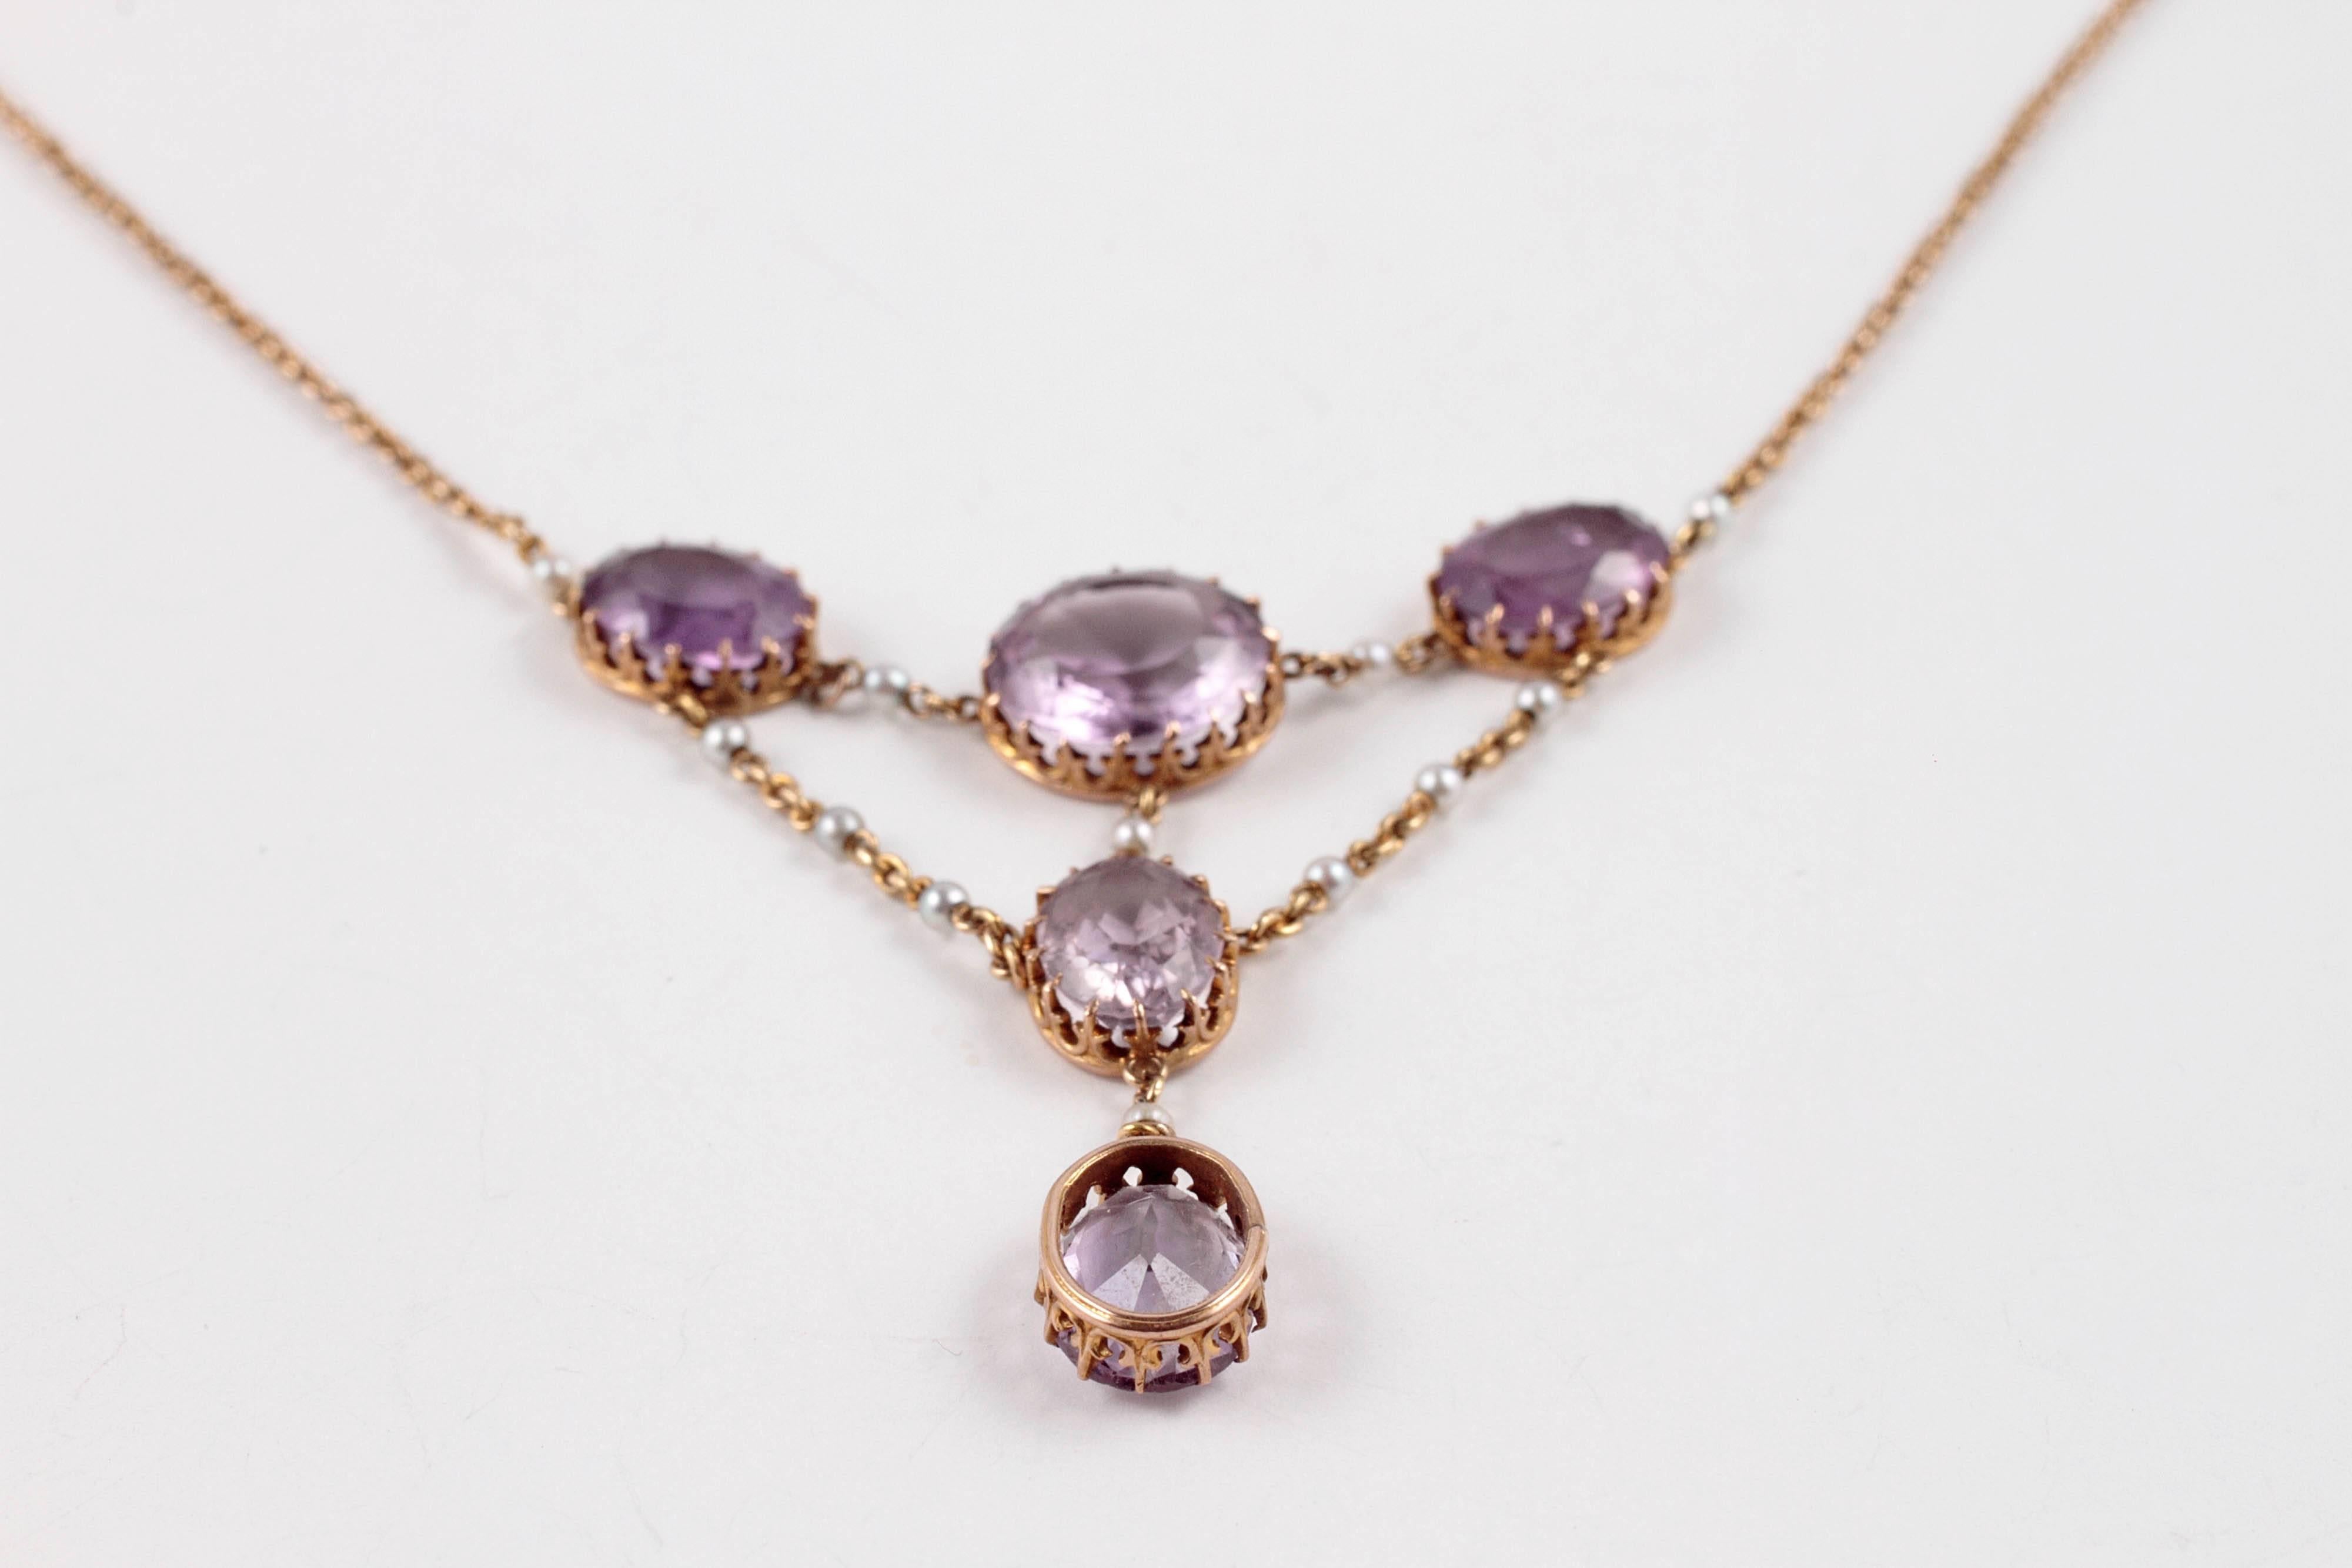 pearl and amethyst necklace